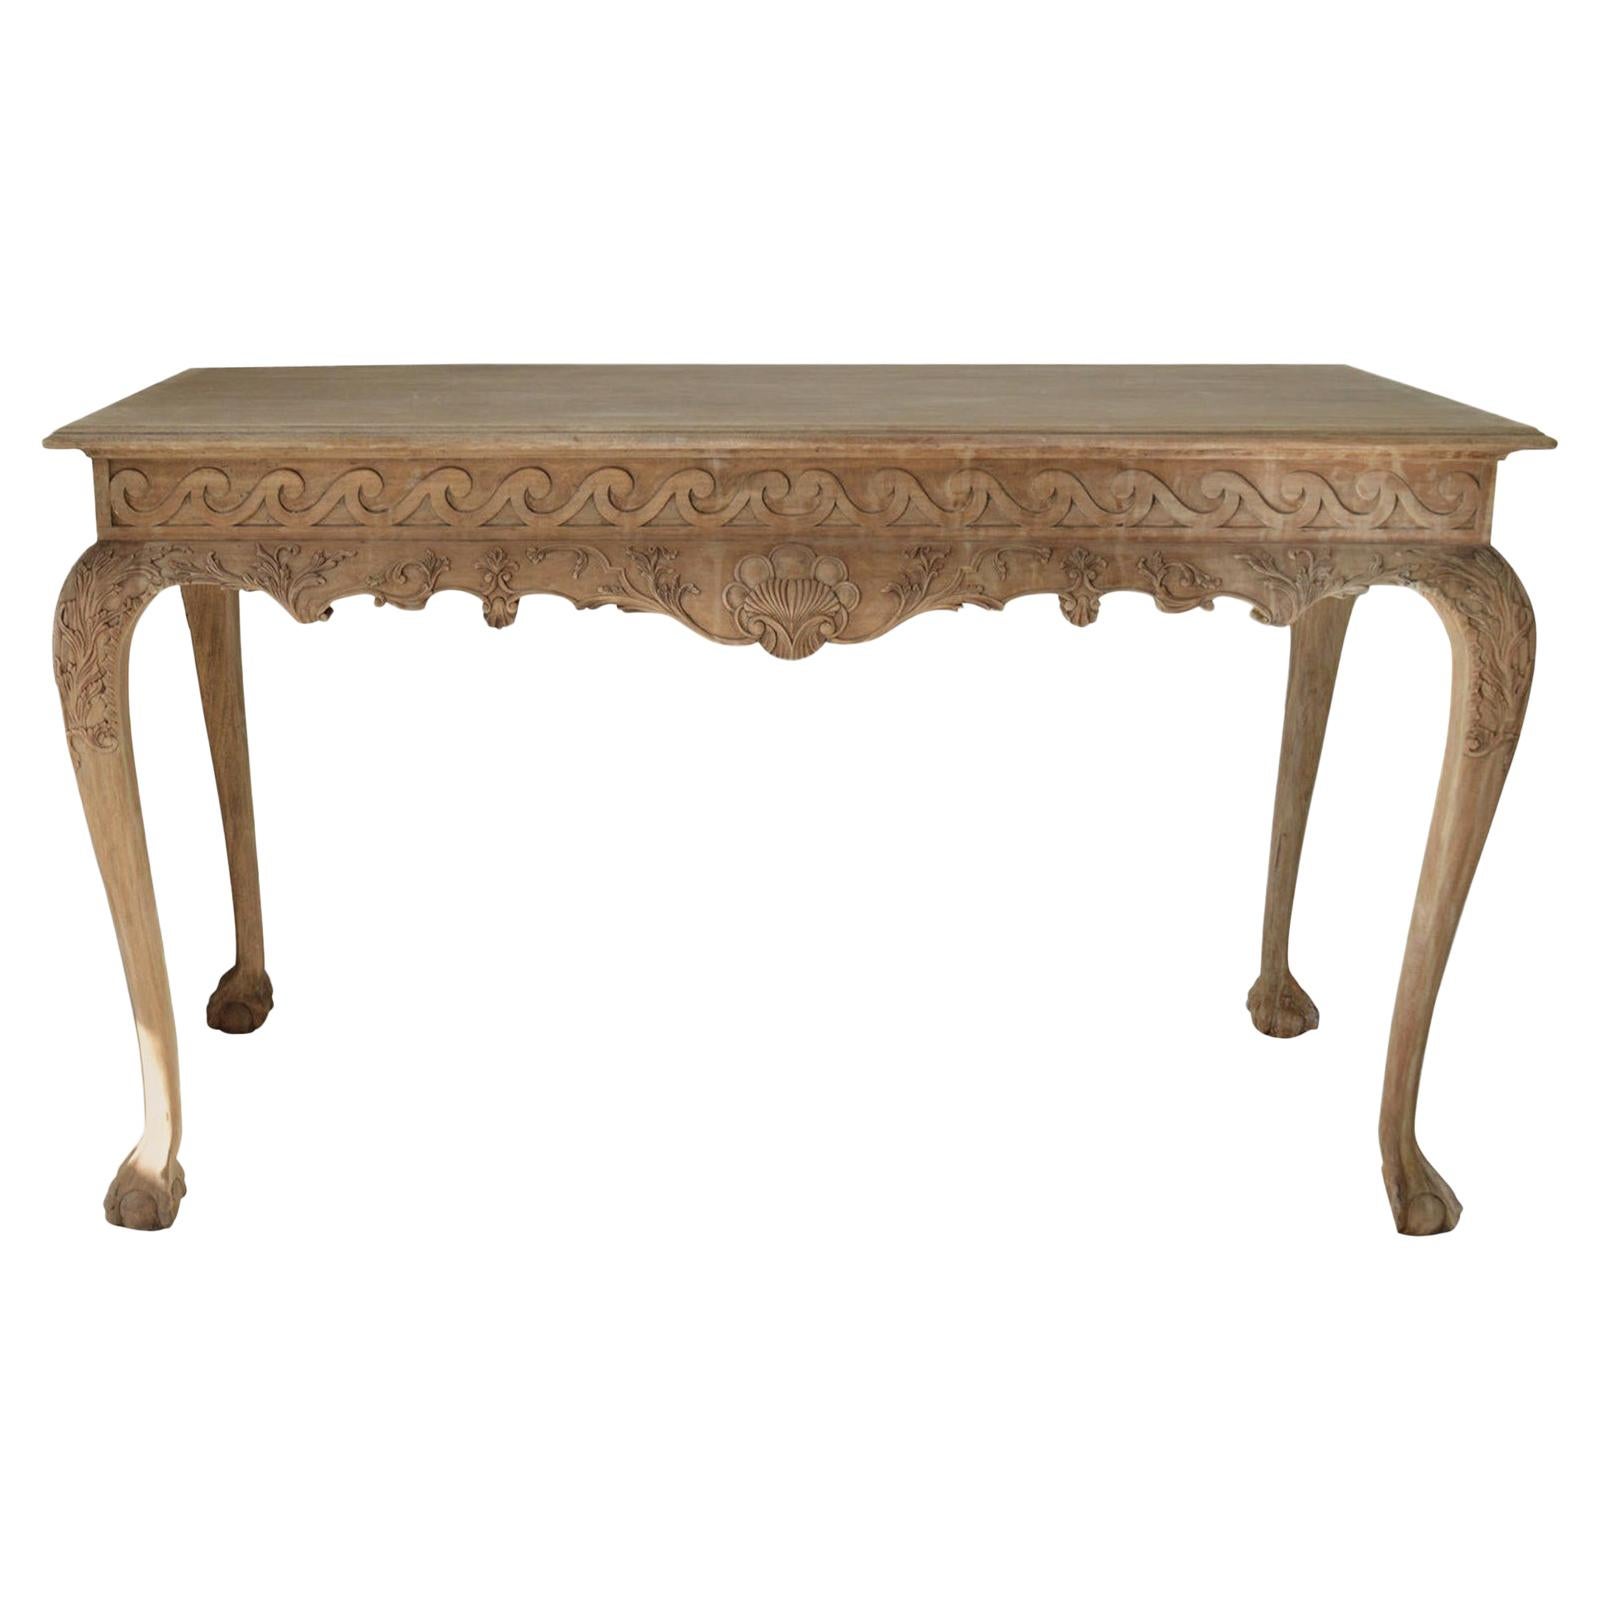 Chippendale Style Bleached Mahogany Console or Serving Table